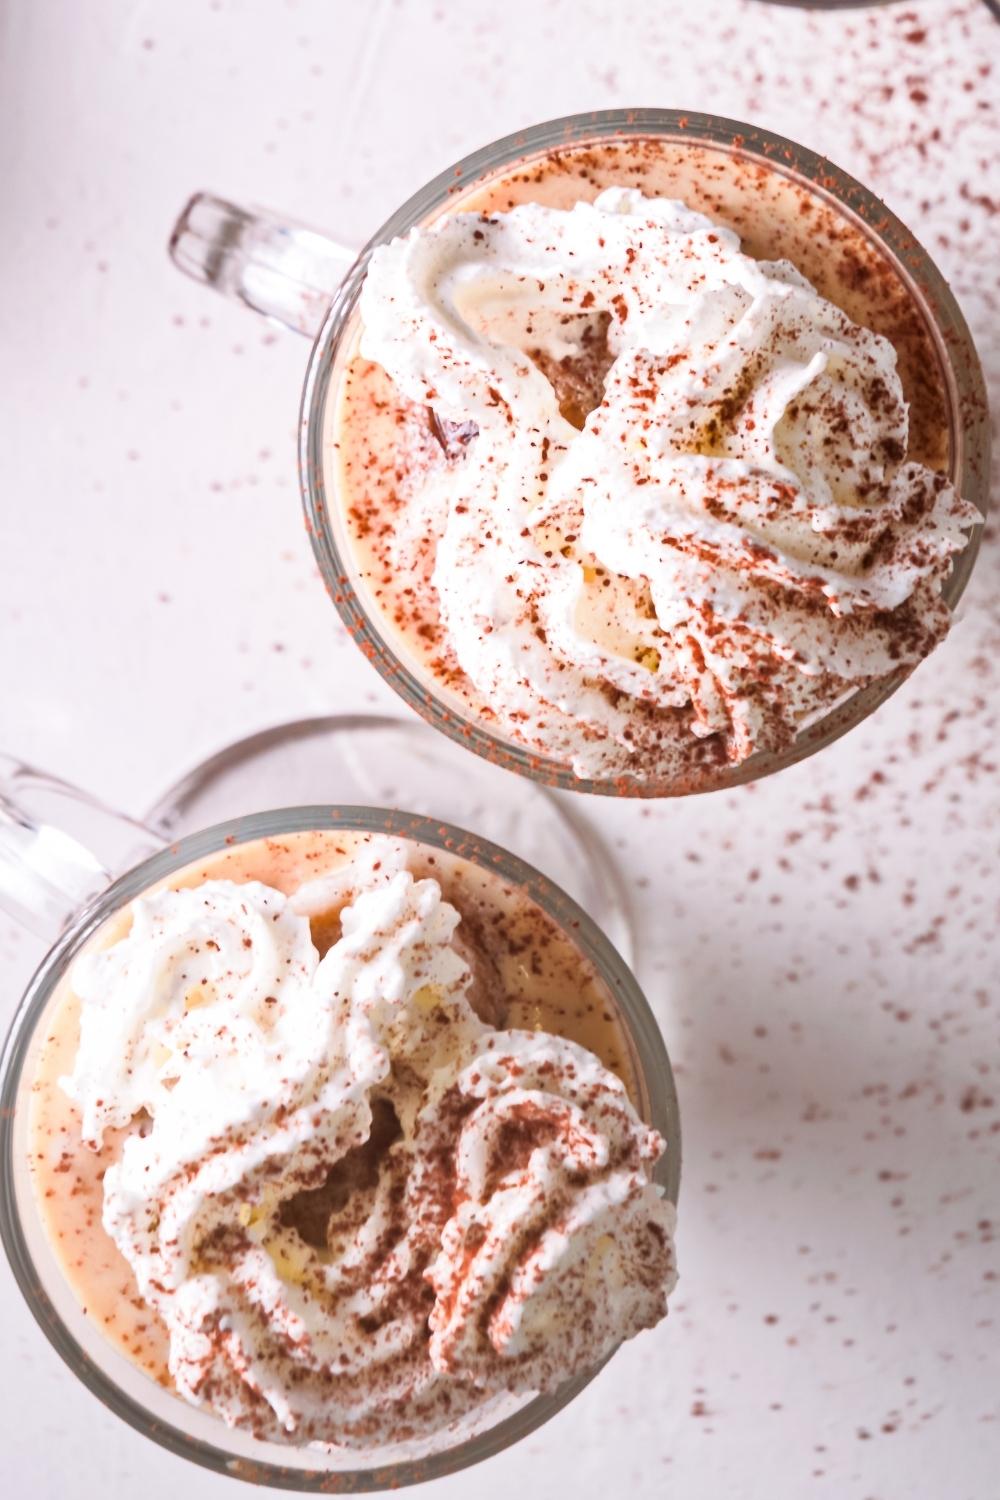 An overhead view of two tall glasses of homemade McDonald's caramel frappe topped with whipped cream and sprinkled with cinnamon.